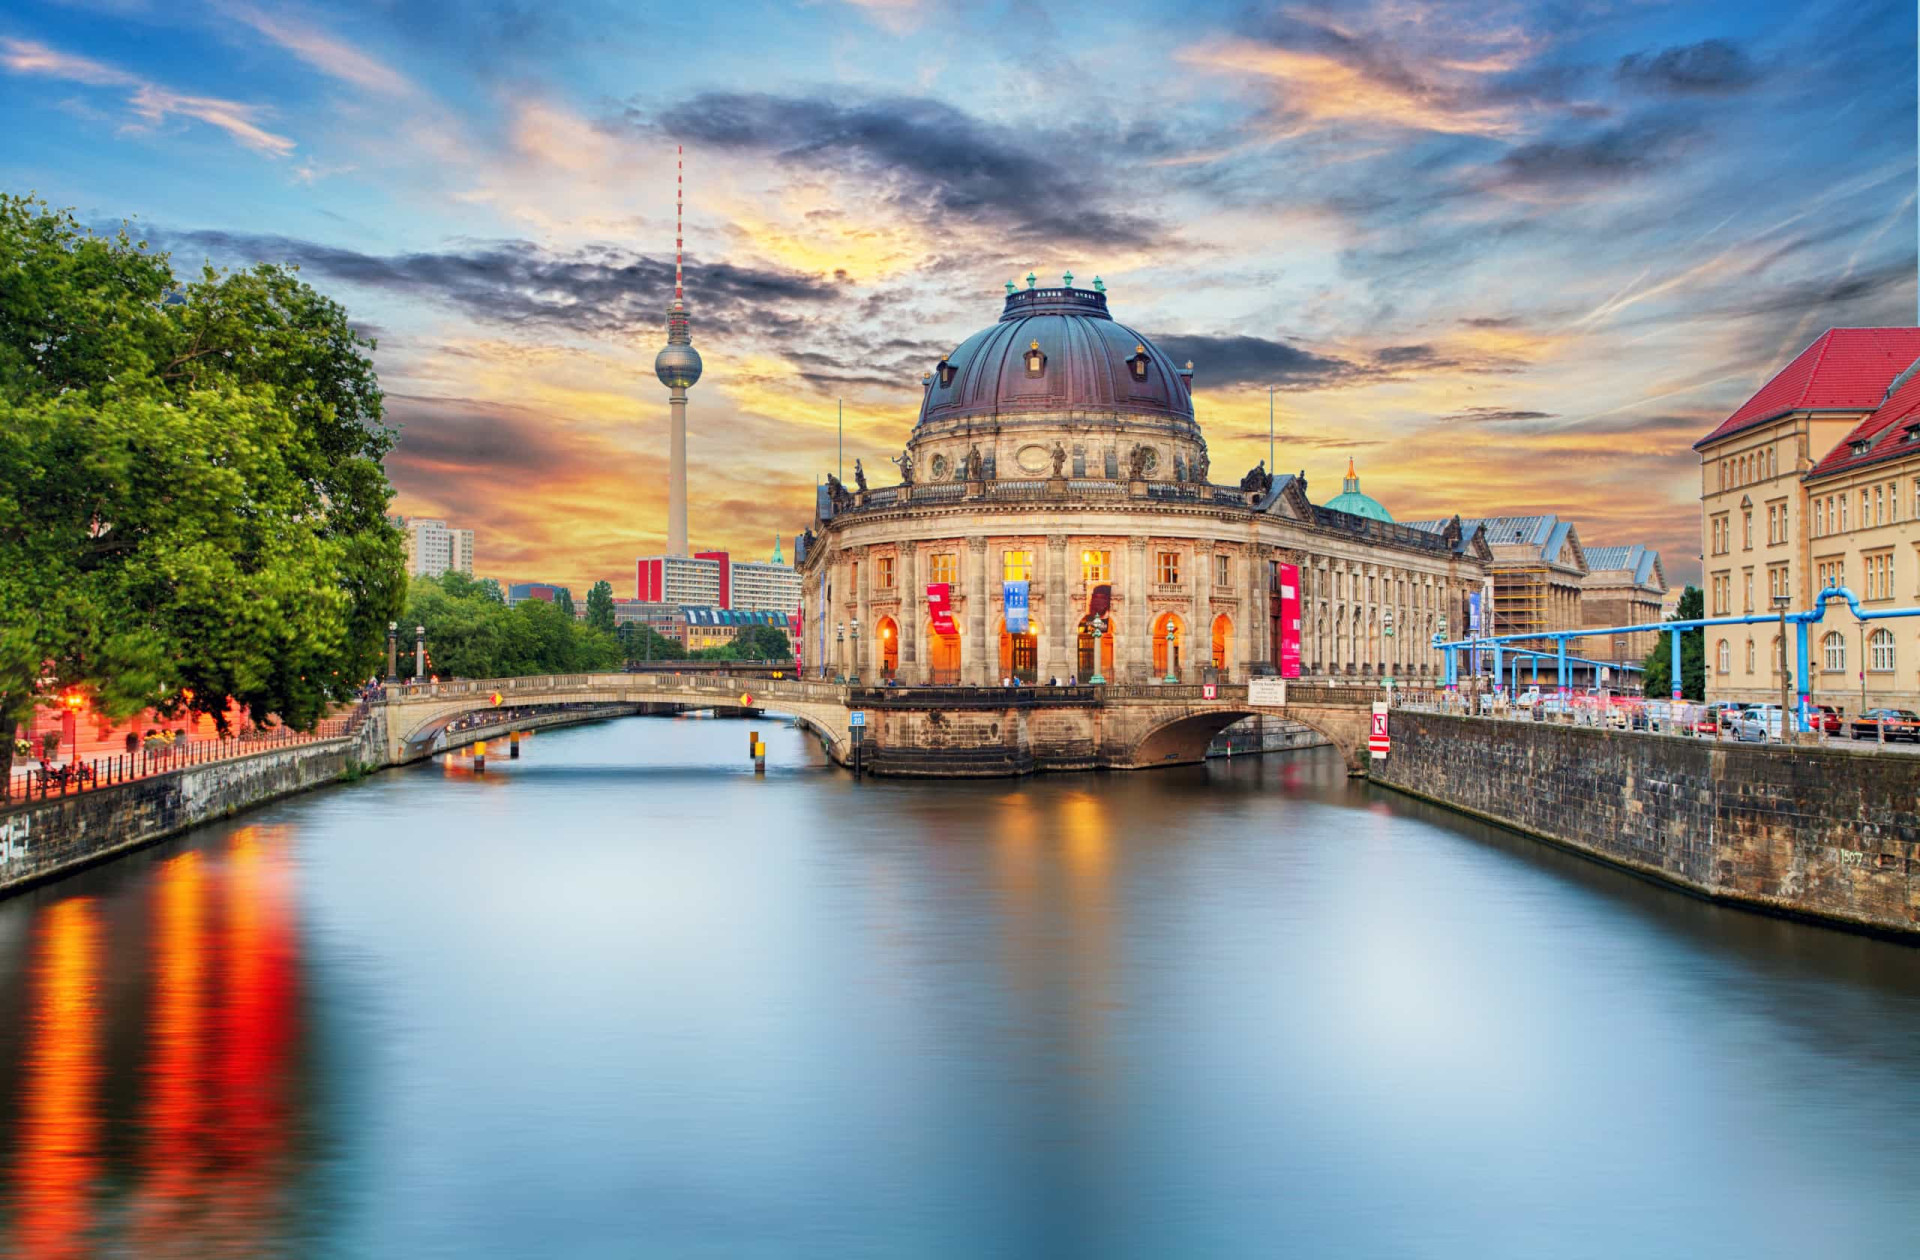 <p>The five museums that make up Berlin's historic Museum Island are actually set on the northern part of Spree Island in the historic heart of the city. The destination's cultural clout is such that UNESCO long ago granted the island World Heritage status.</p><p><a href="https://www.msn.com/en-us/community/channel/vid-7xx8mnucu55yw63we9va2gwr7uihbxwc68fxqp25x6tg4ftibpra?cvid=94631541bc0f4f89bfd59158d696ad7e">Follow us and access great exclusive content every day</a></p>